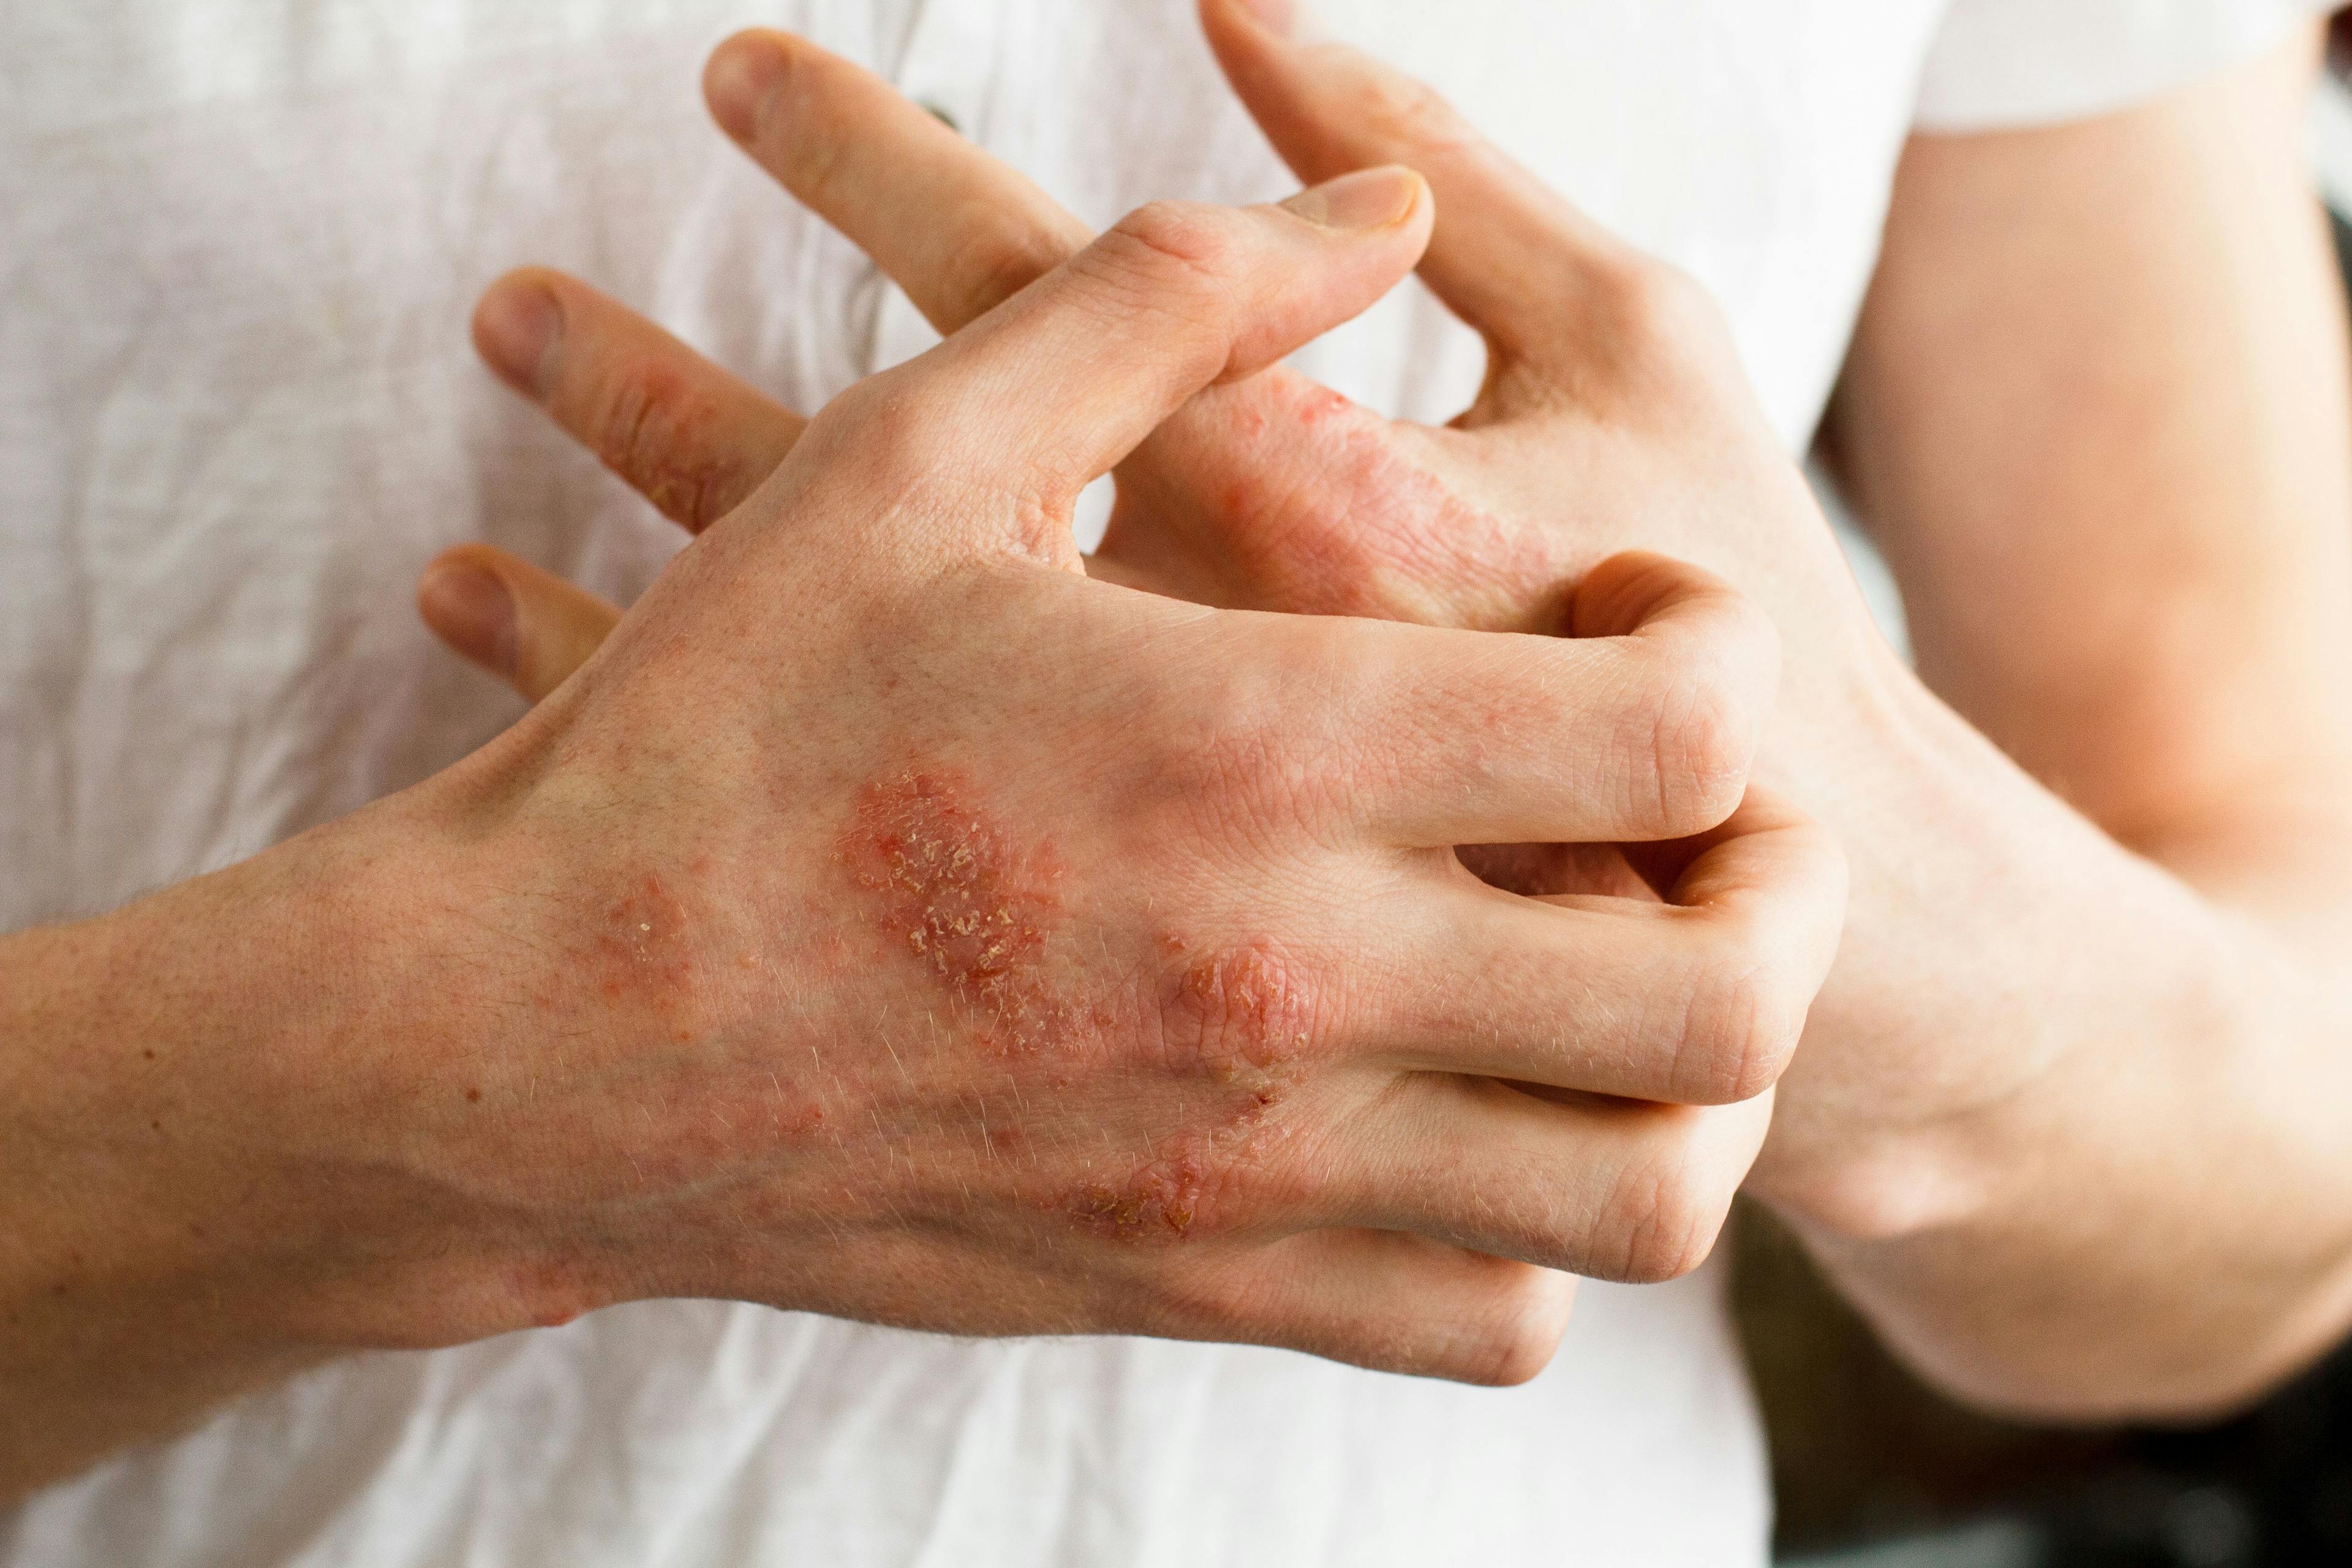 Exposure to Heavy Traffic Affects Risk of Atopic Dermatitis